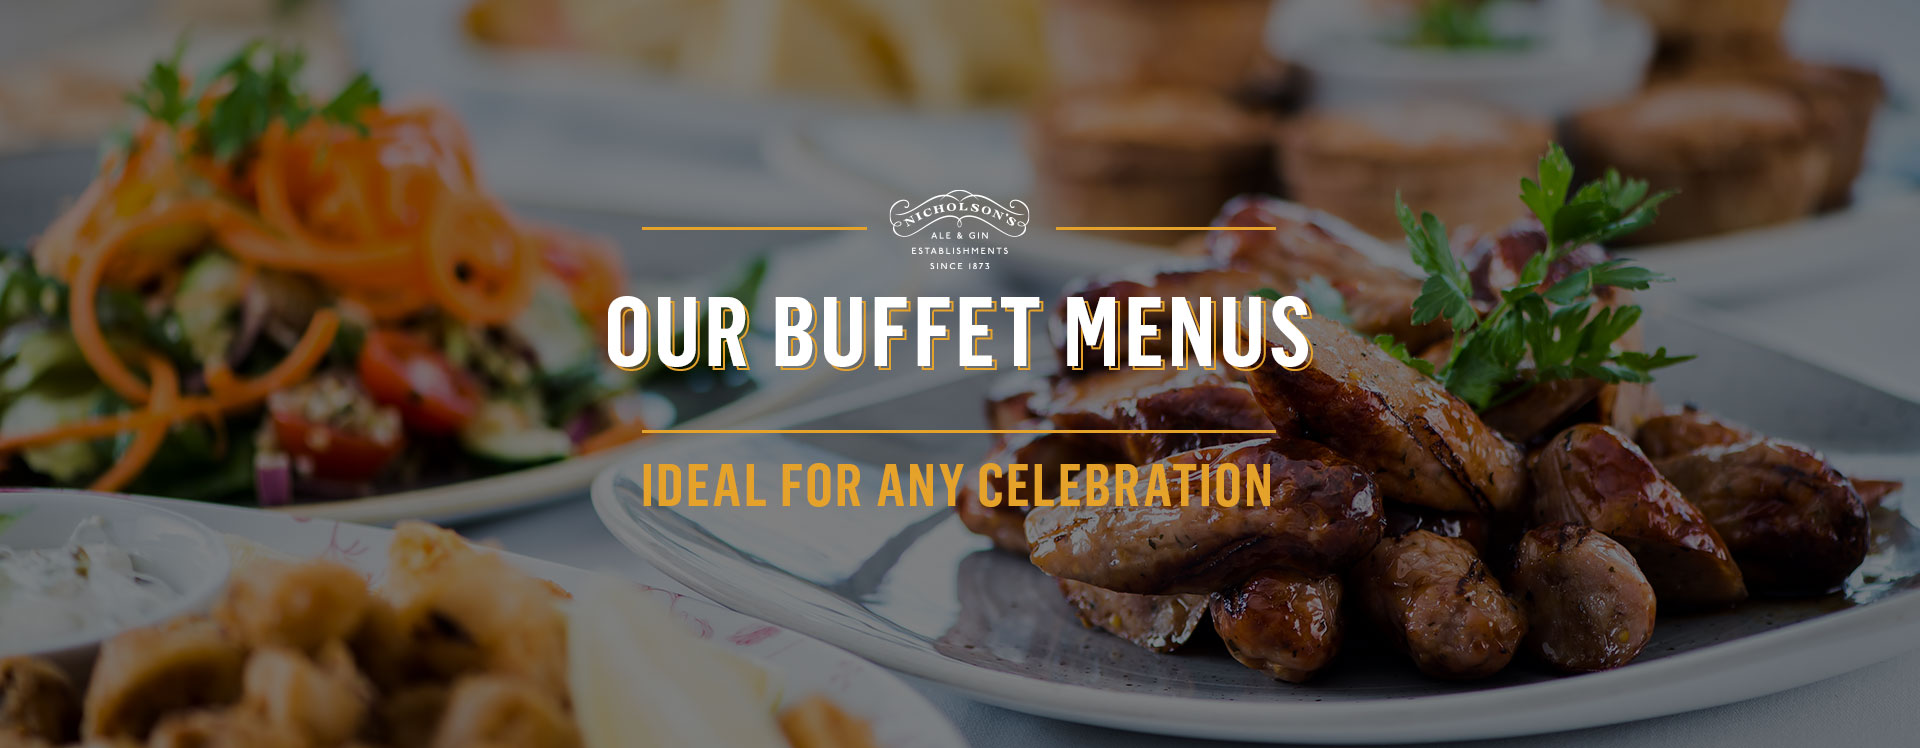 Buffet menu at The Old White Swan - Book a table